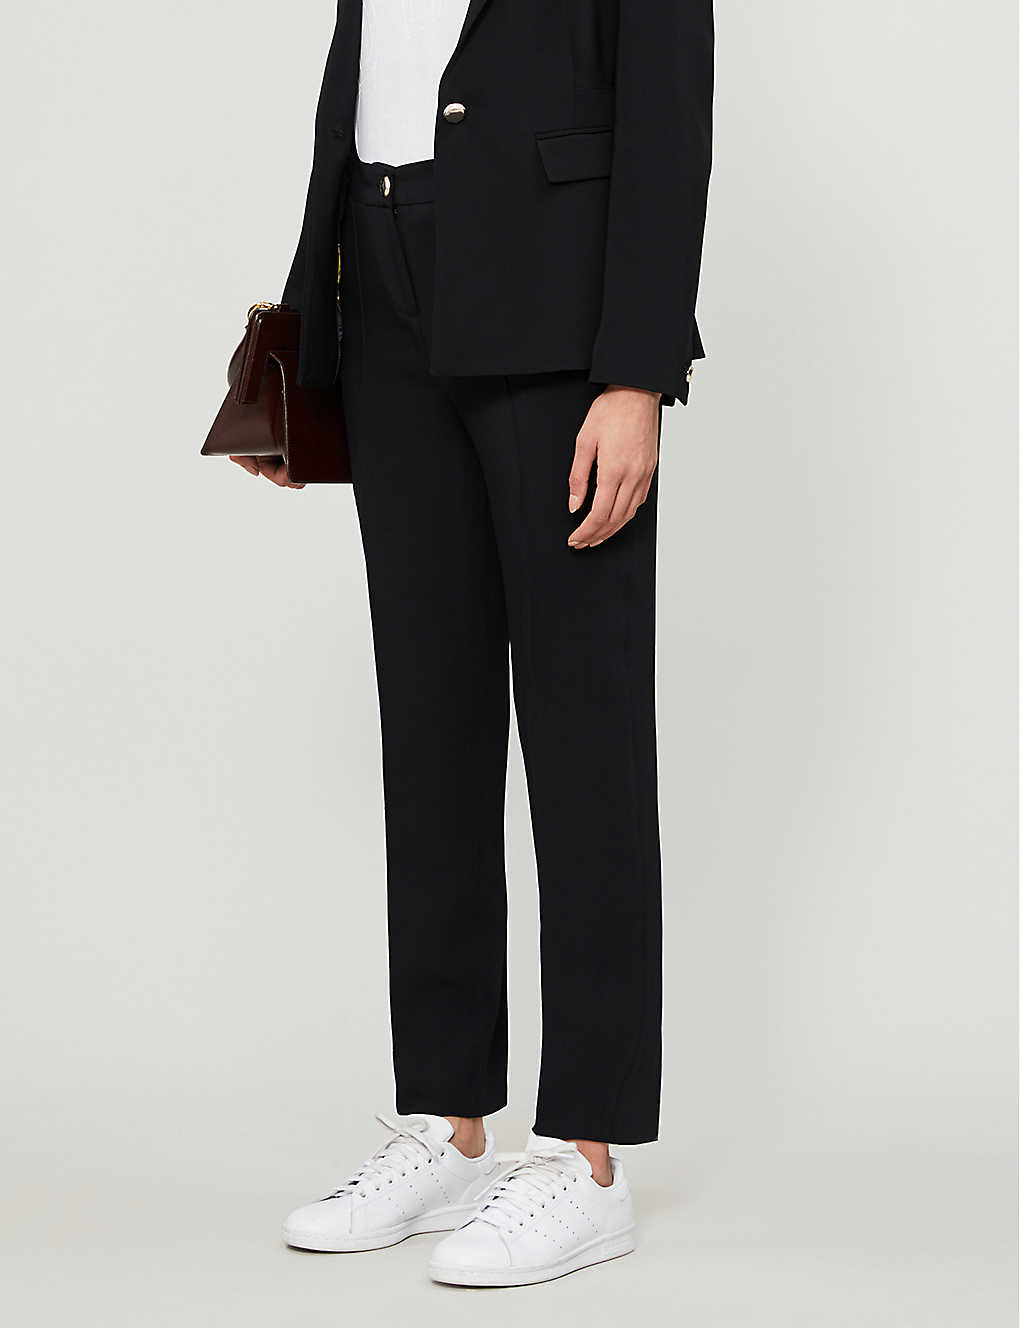 Shop Ted Baker Women's Black Tapered Crepe Trousers